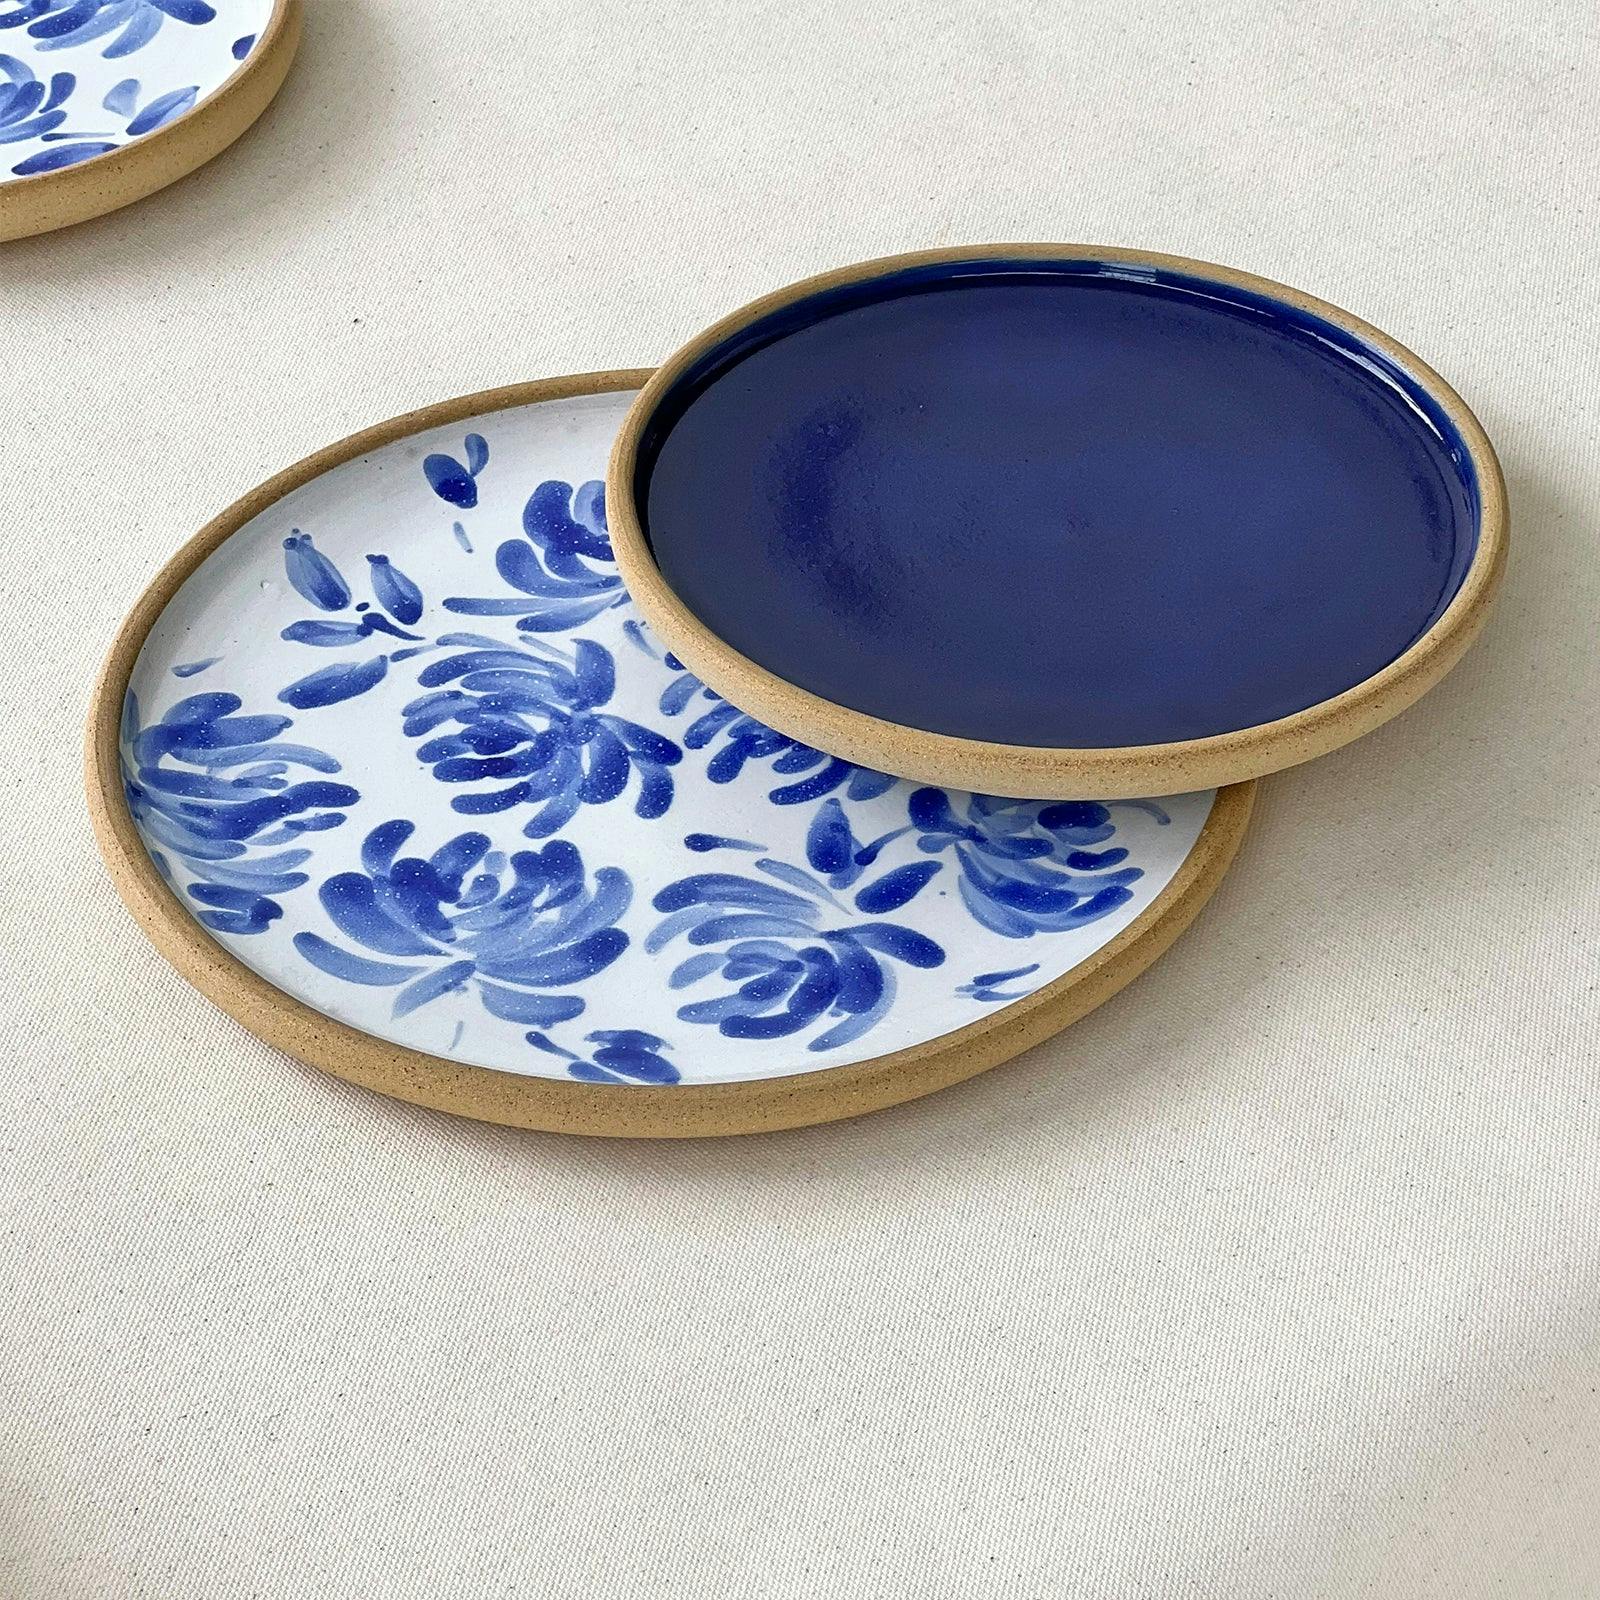 Chrysanthemum Dinner + Side Plate Set, a product by Midori Collective